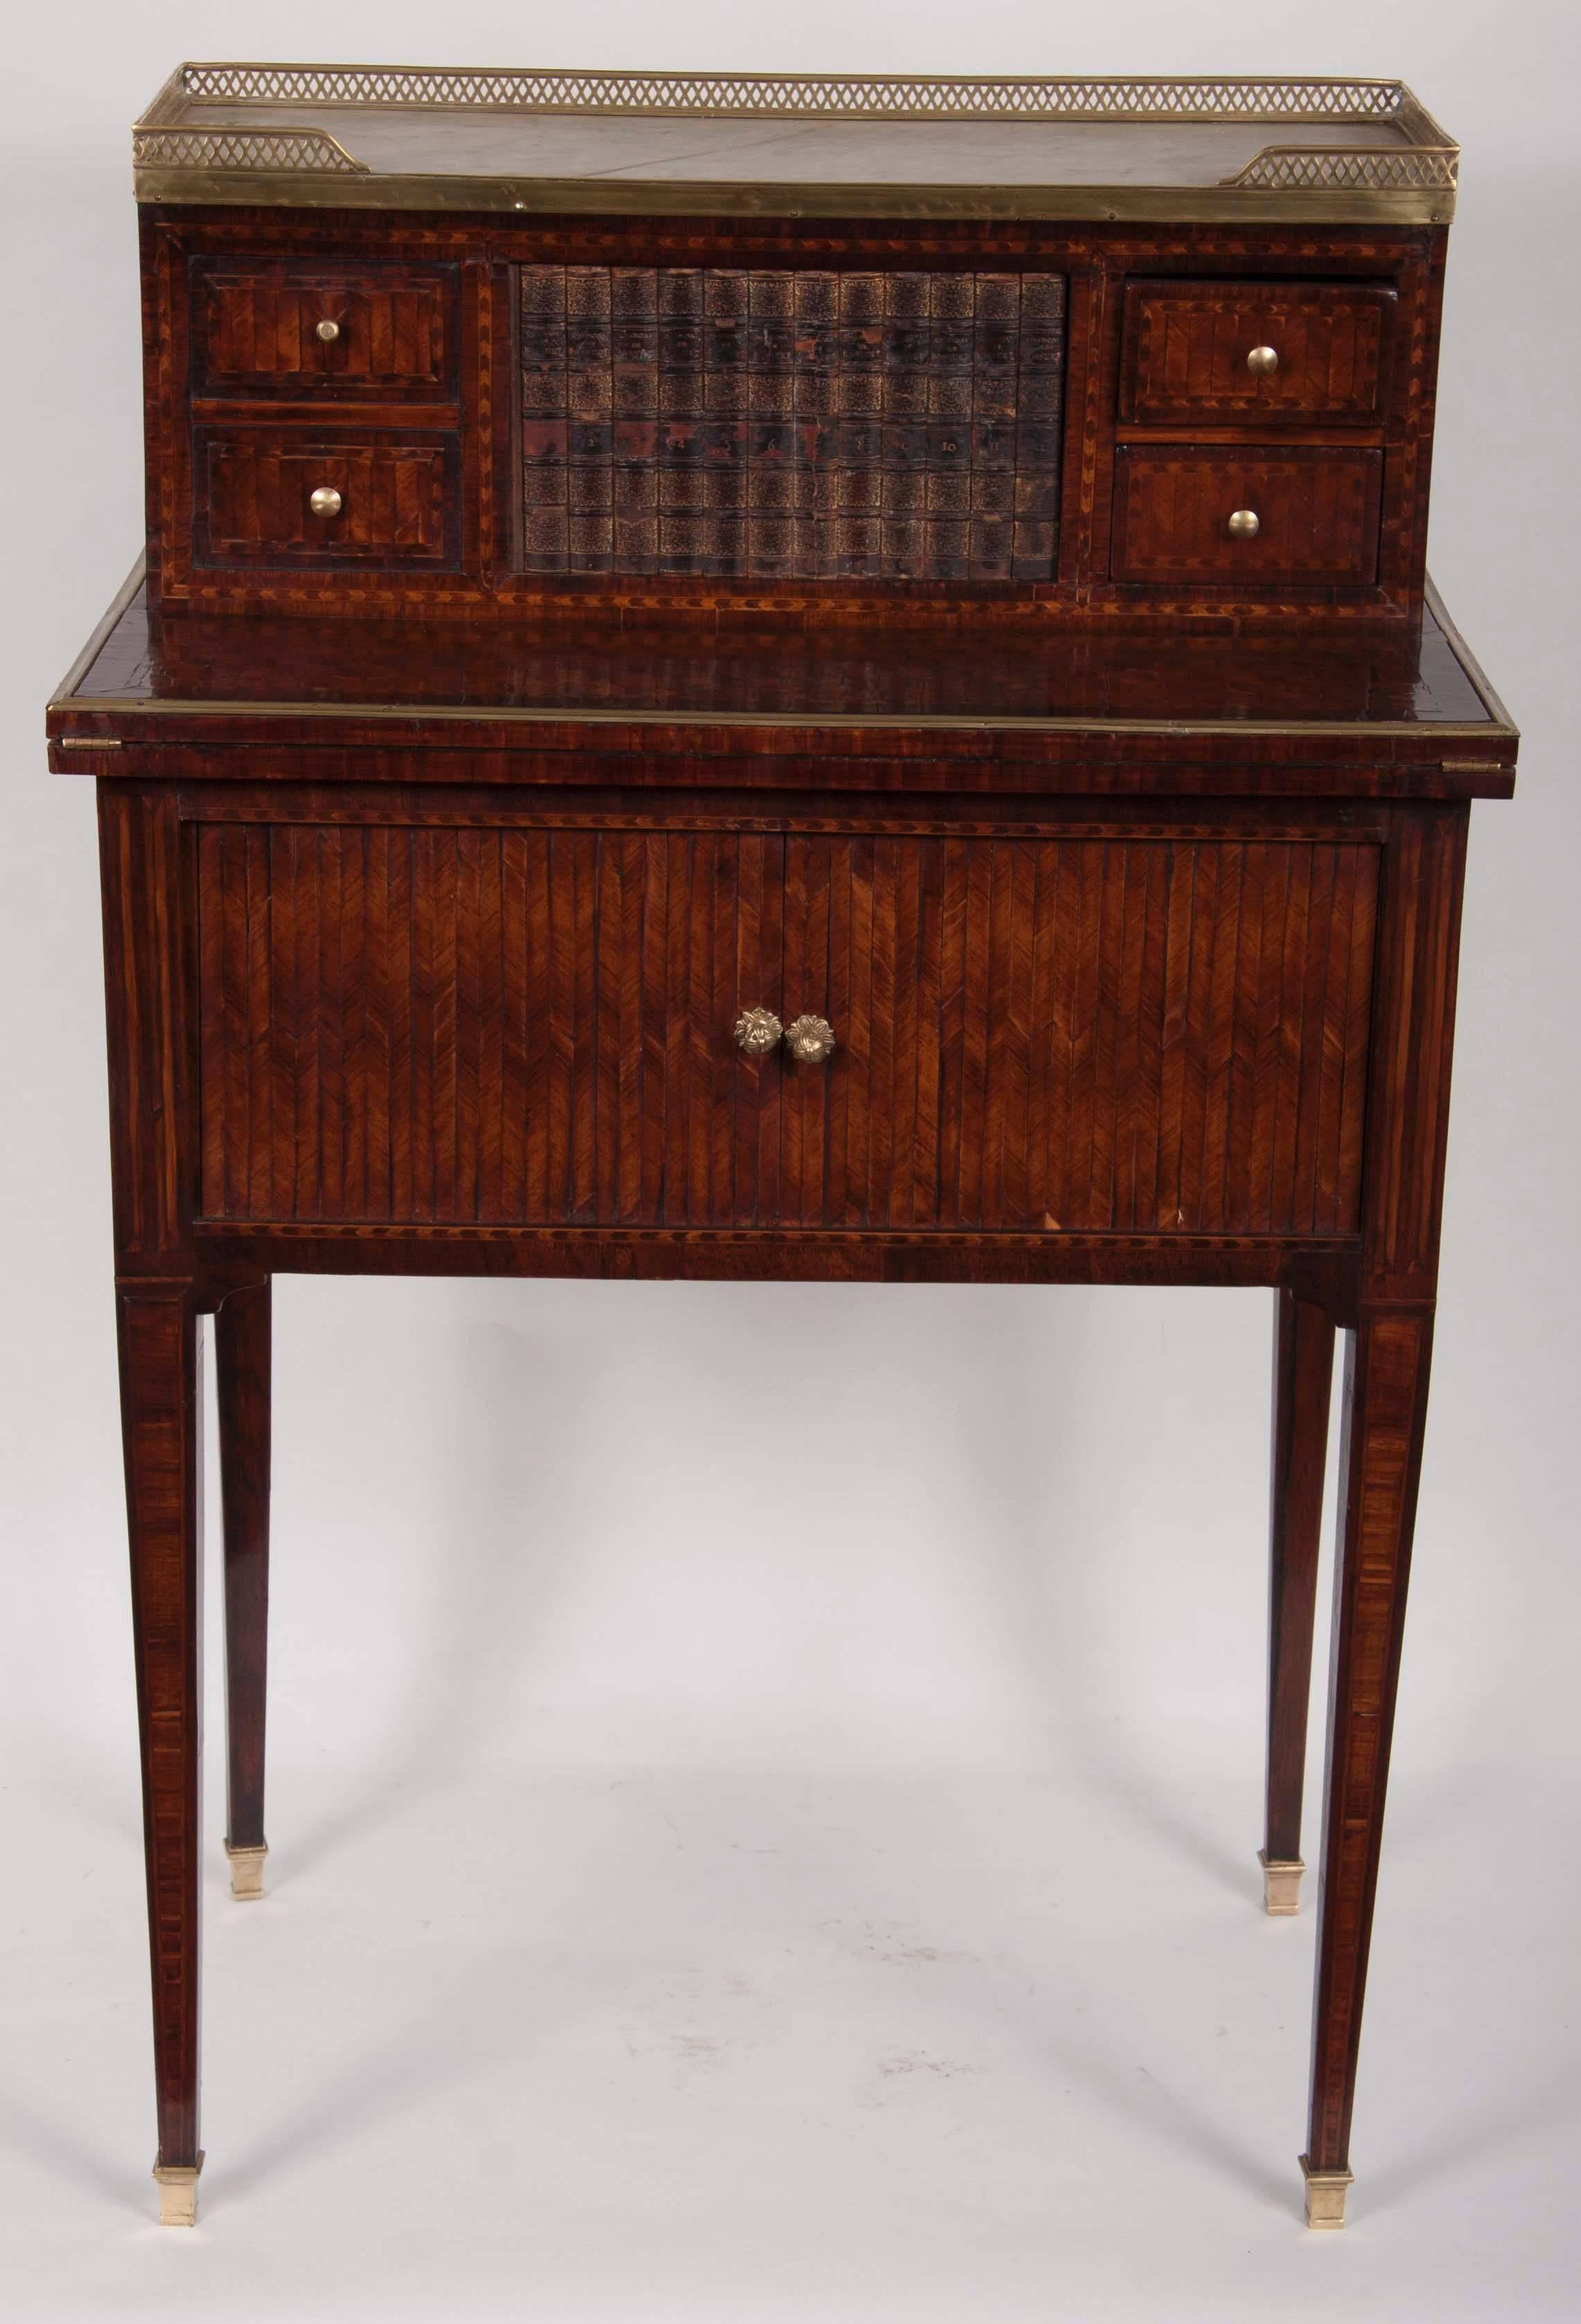 French Louis XVI writing desk with white marble top. Gilt bronze-mounted top panel has four pull-out drawers, foldable side panels and bottom compartment has three additional drawers.